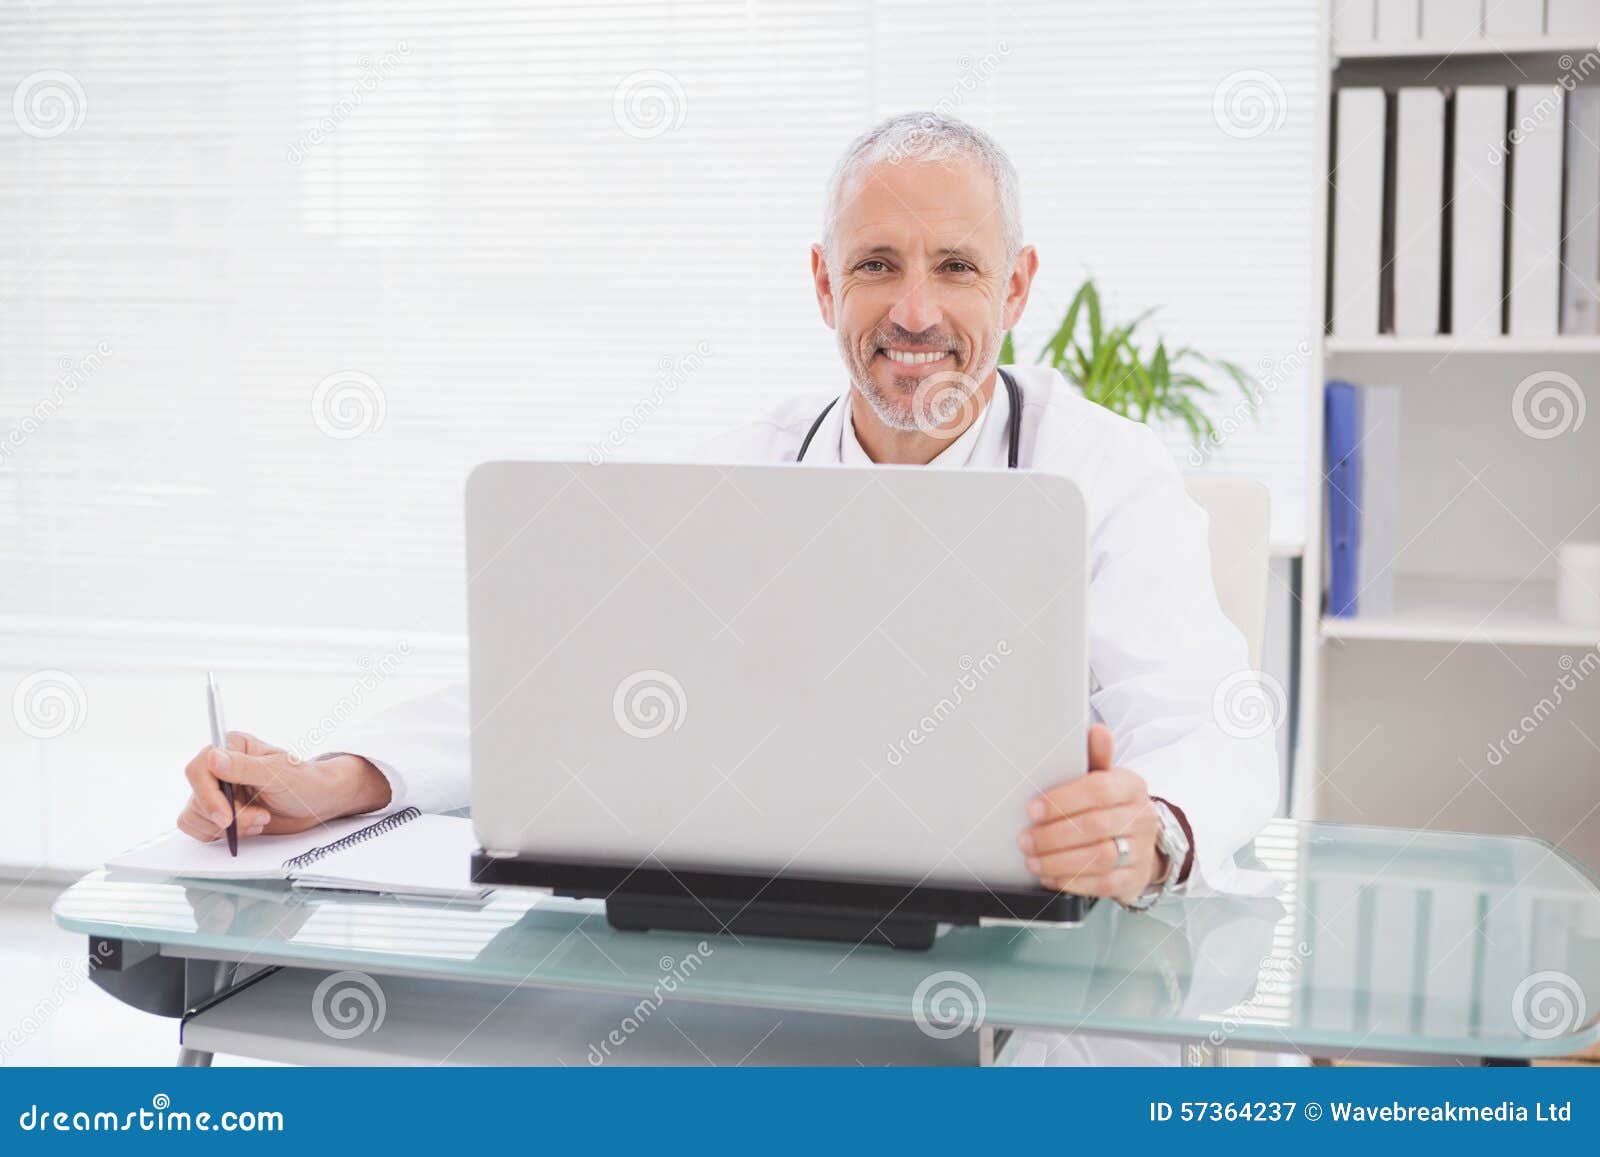 Smiling Doctor Using Laptop and Writing Stock Image - Image of ...